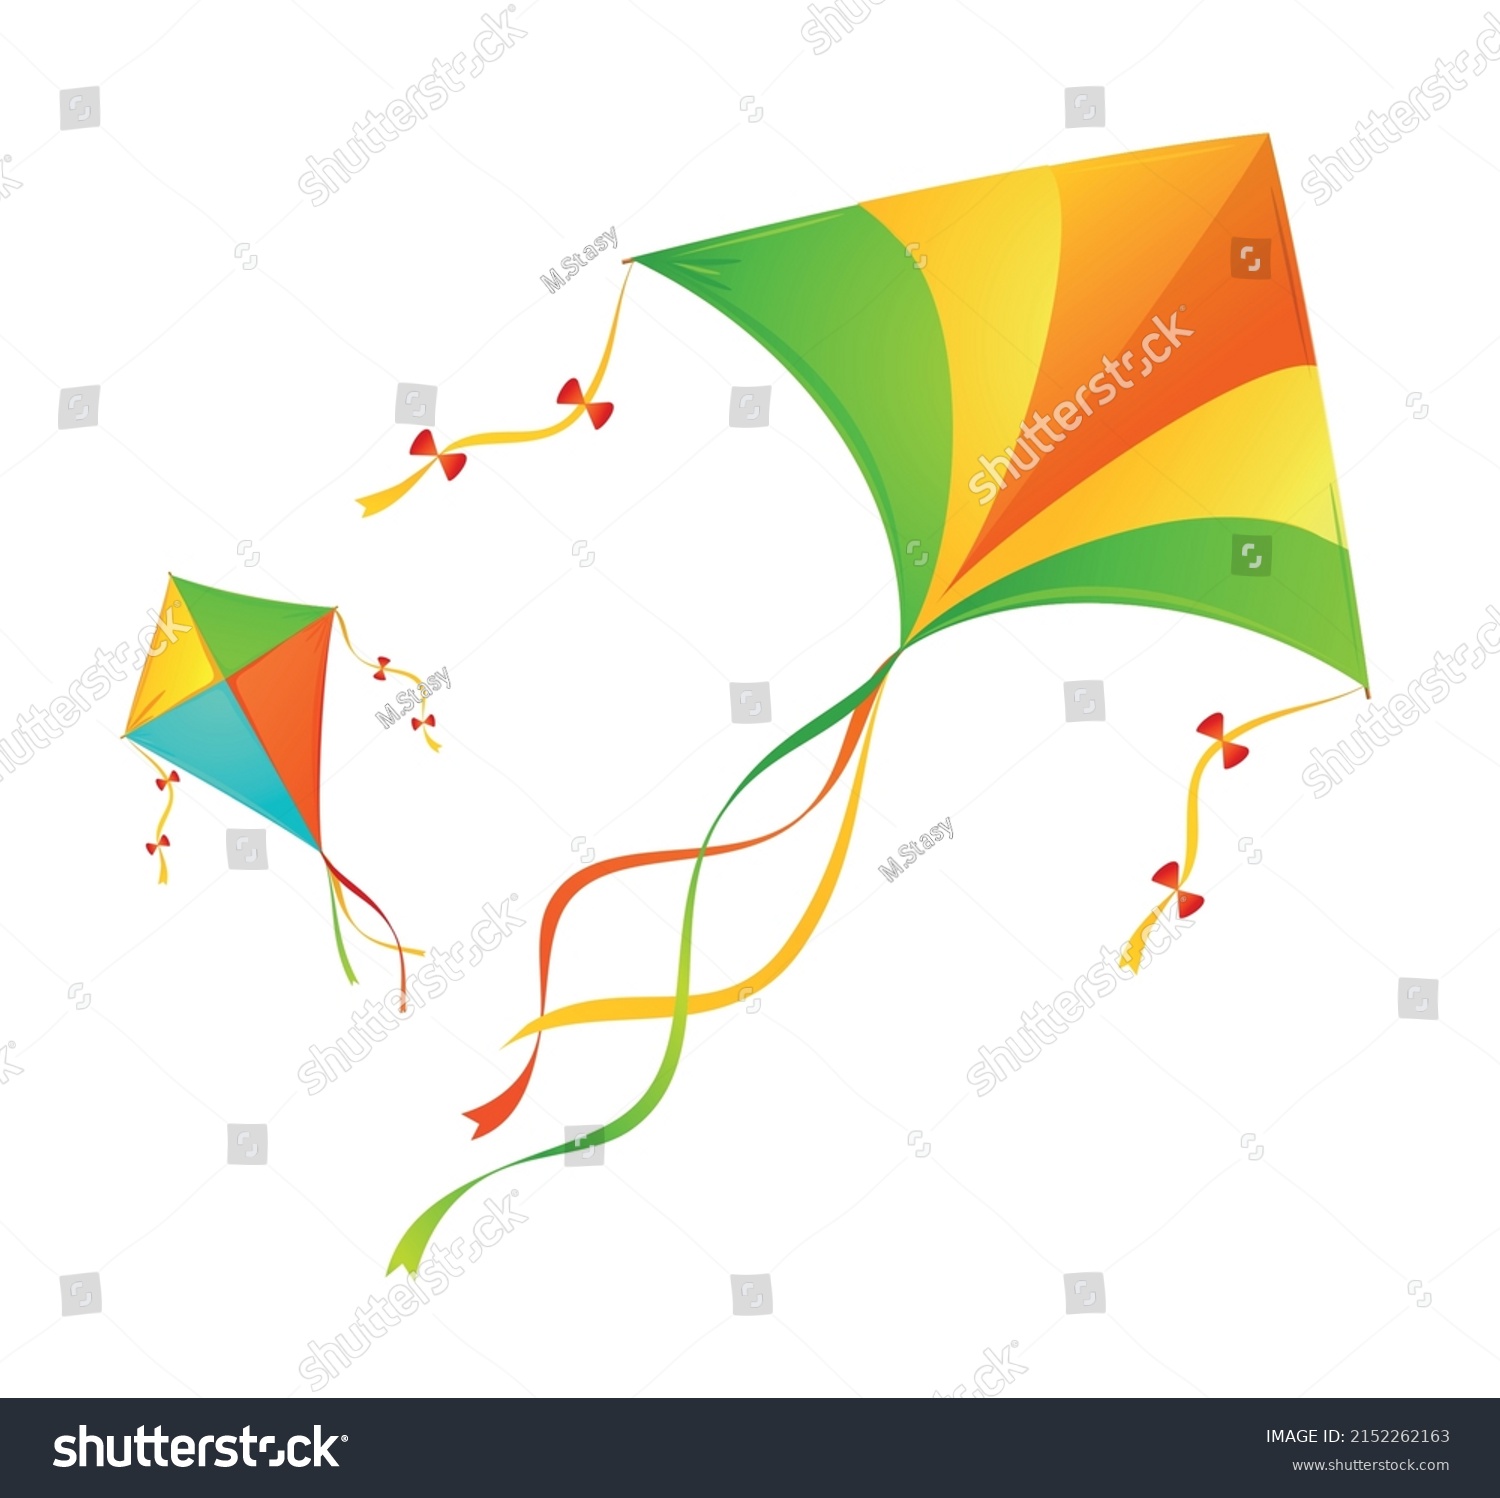 SVG of Realistic Detailed 3d Flying Kite Toy Set Isolated on a White Background. Vector illustration of Kites svg